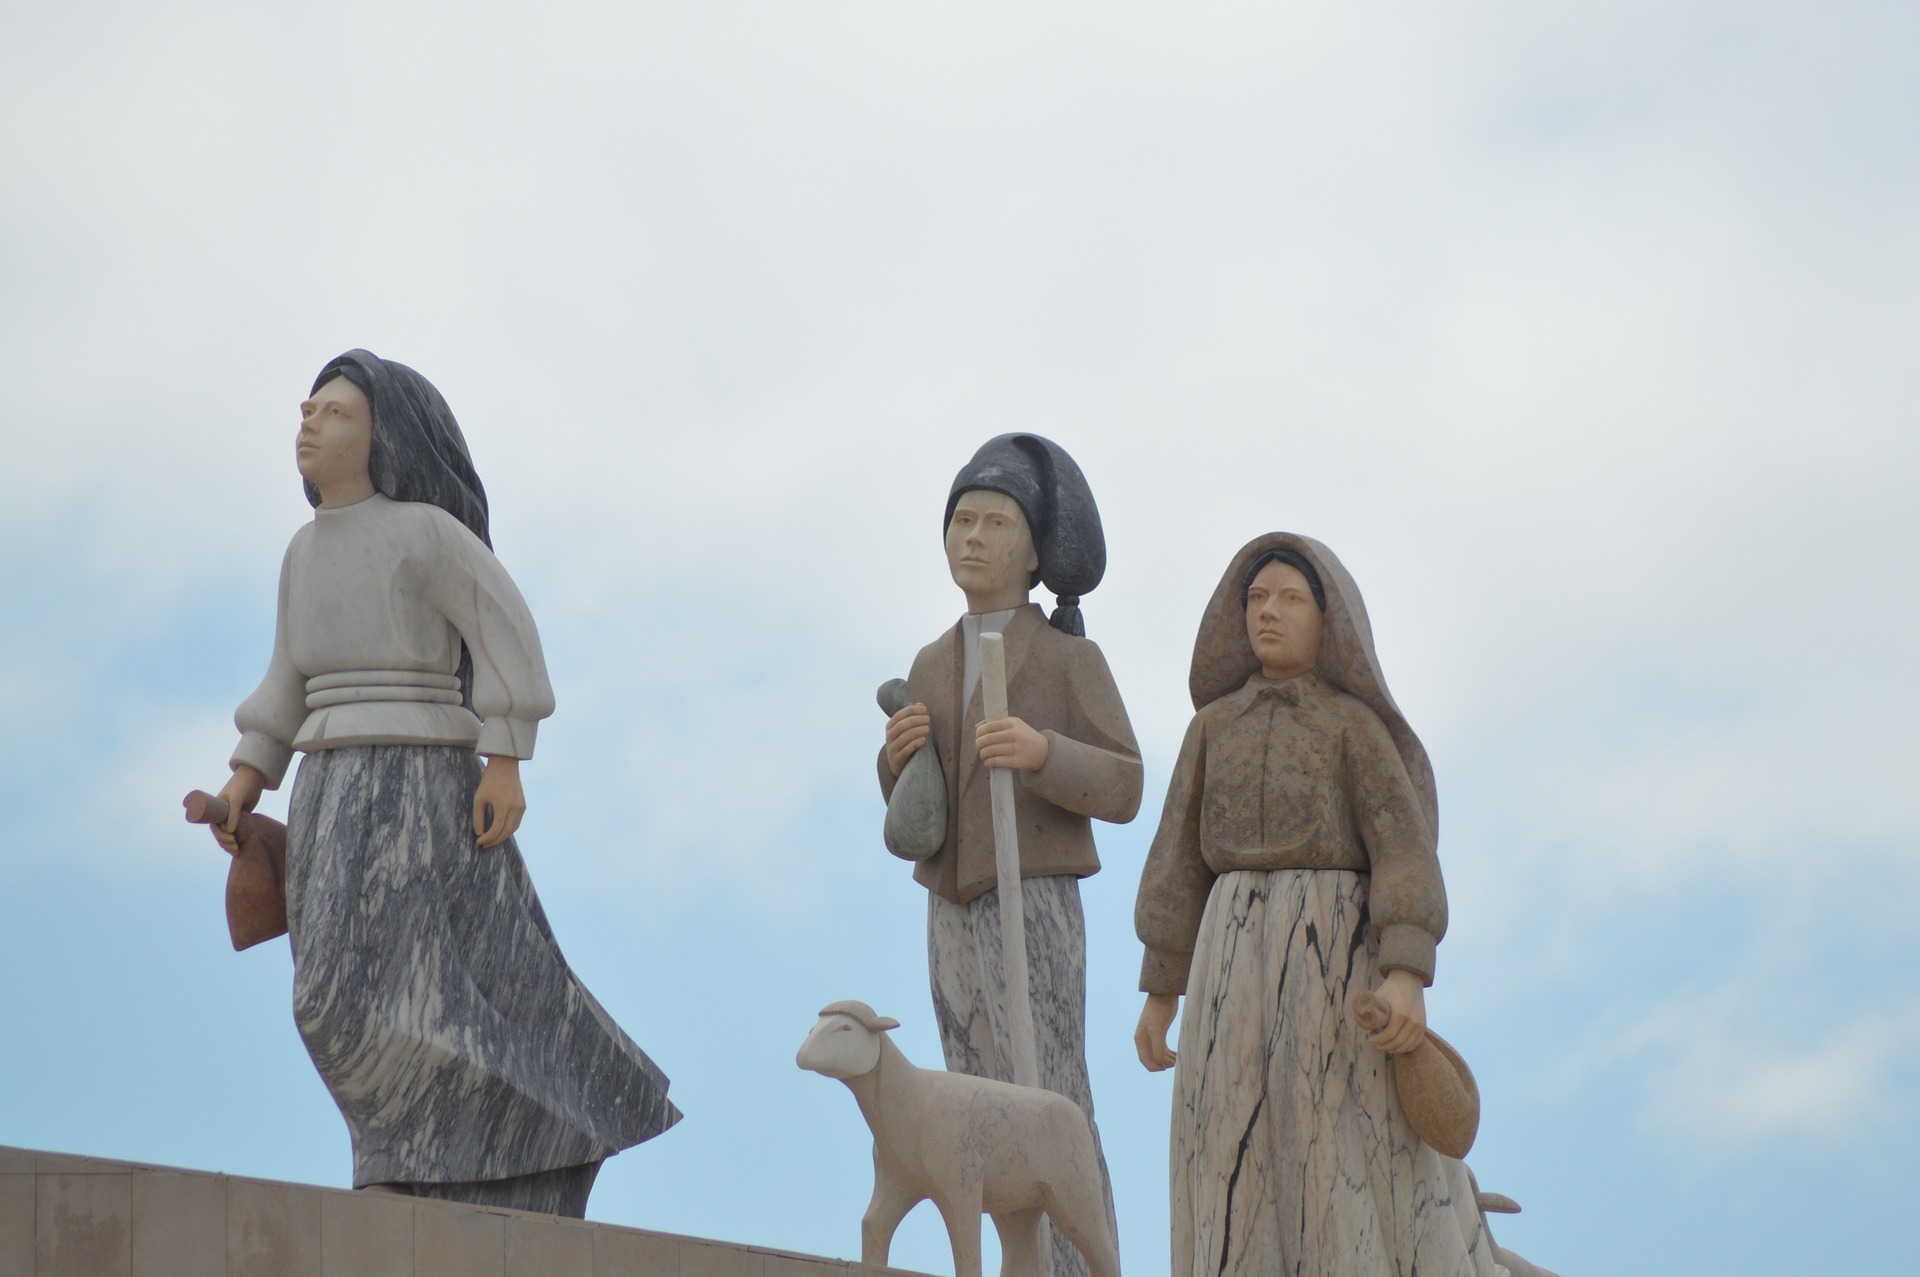 Statue depicting Lucia, Franciso, and Jacinta - the three child visionaries of Fatima